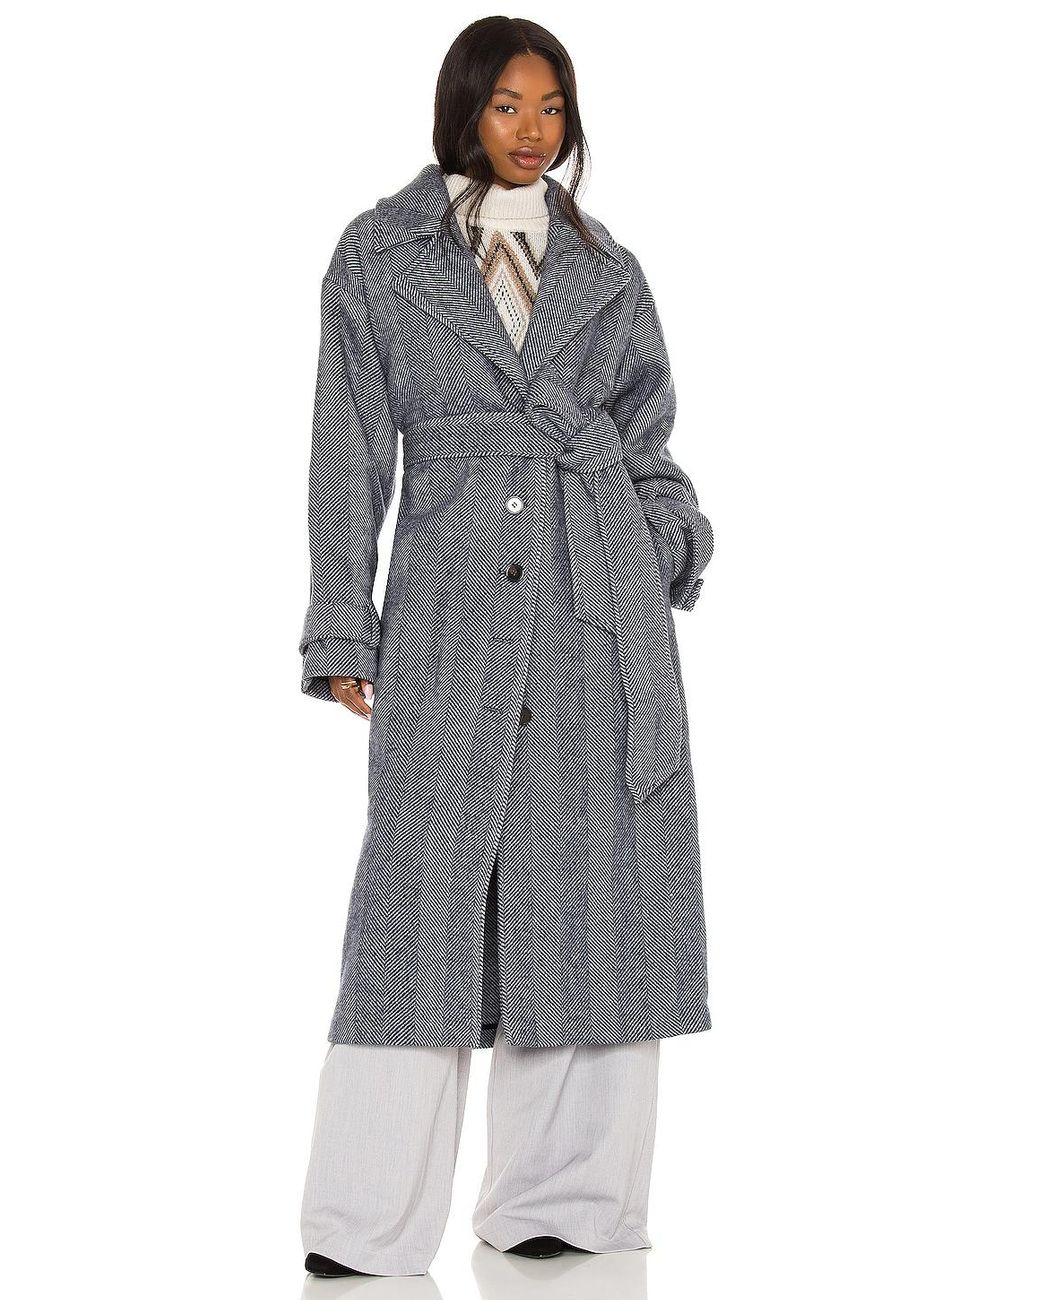 House of Harlow 1960 X Revolve Zurich Coat in Gray | Lyst